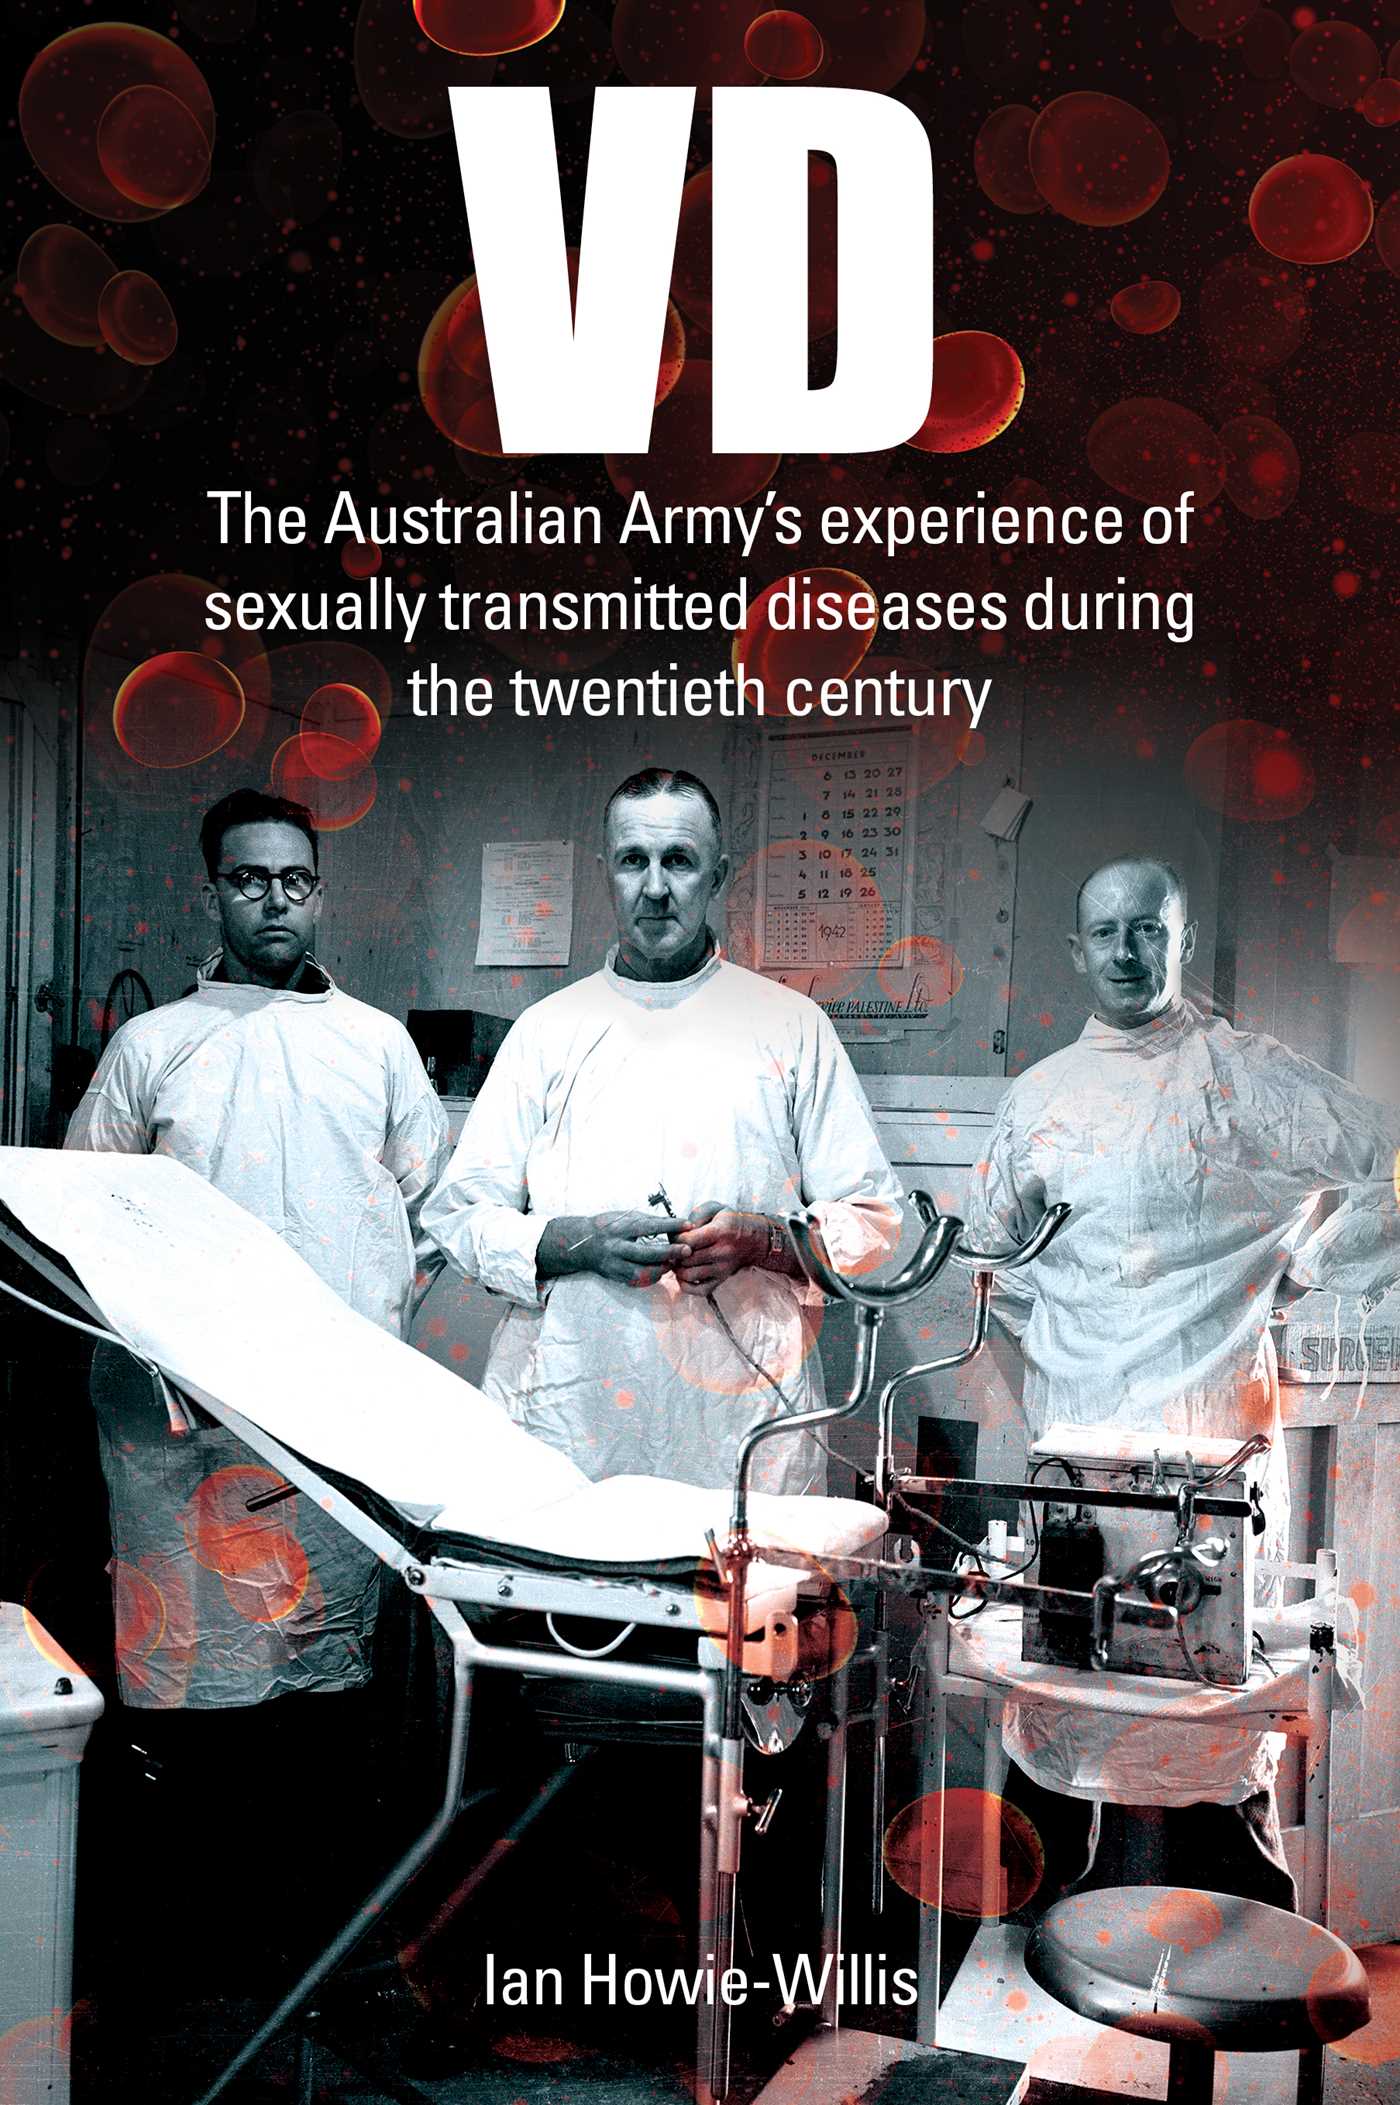 VD: The Australian Army's experience of sexually transmitted diseases during the twentieth century